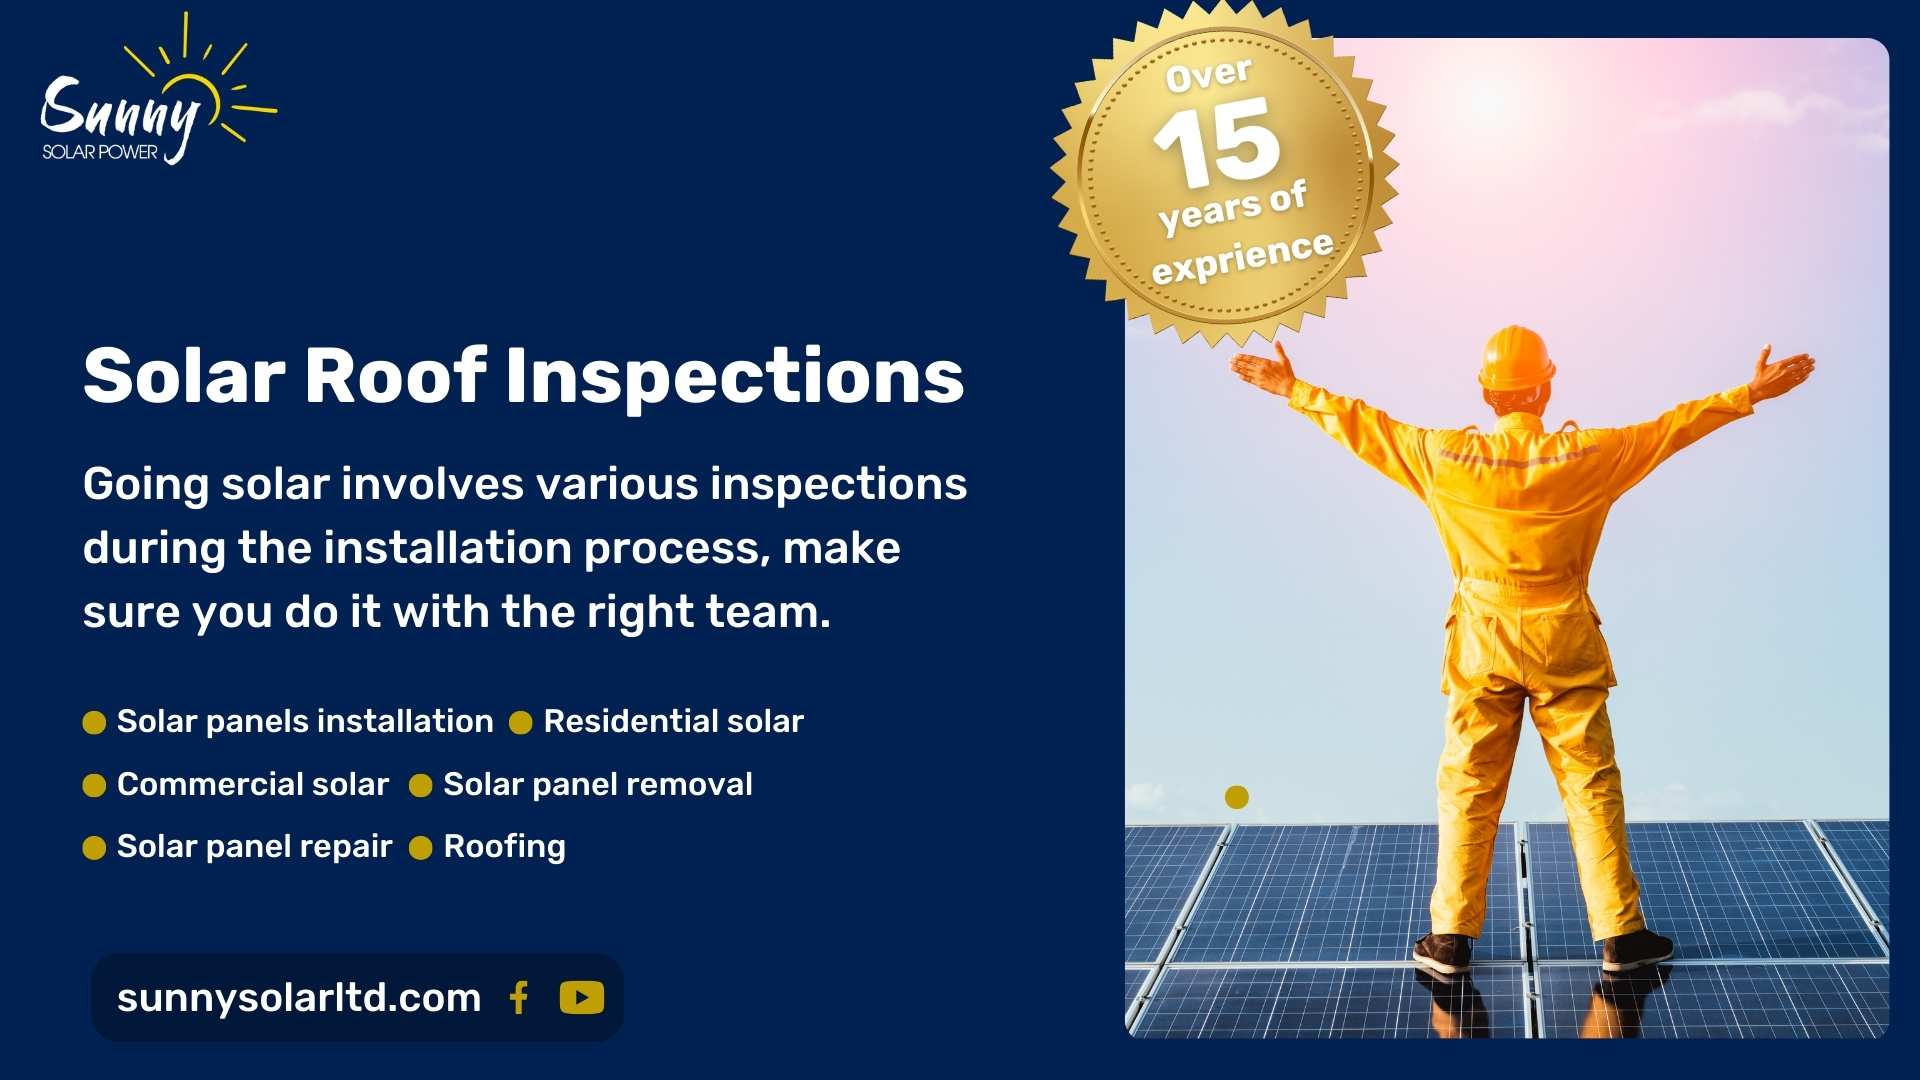 Solar Roof Inspections